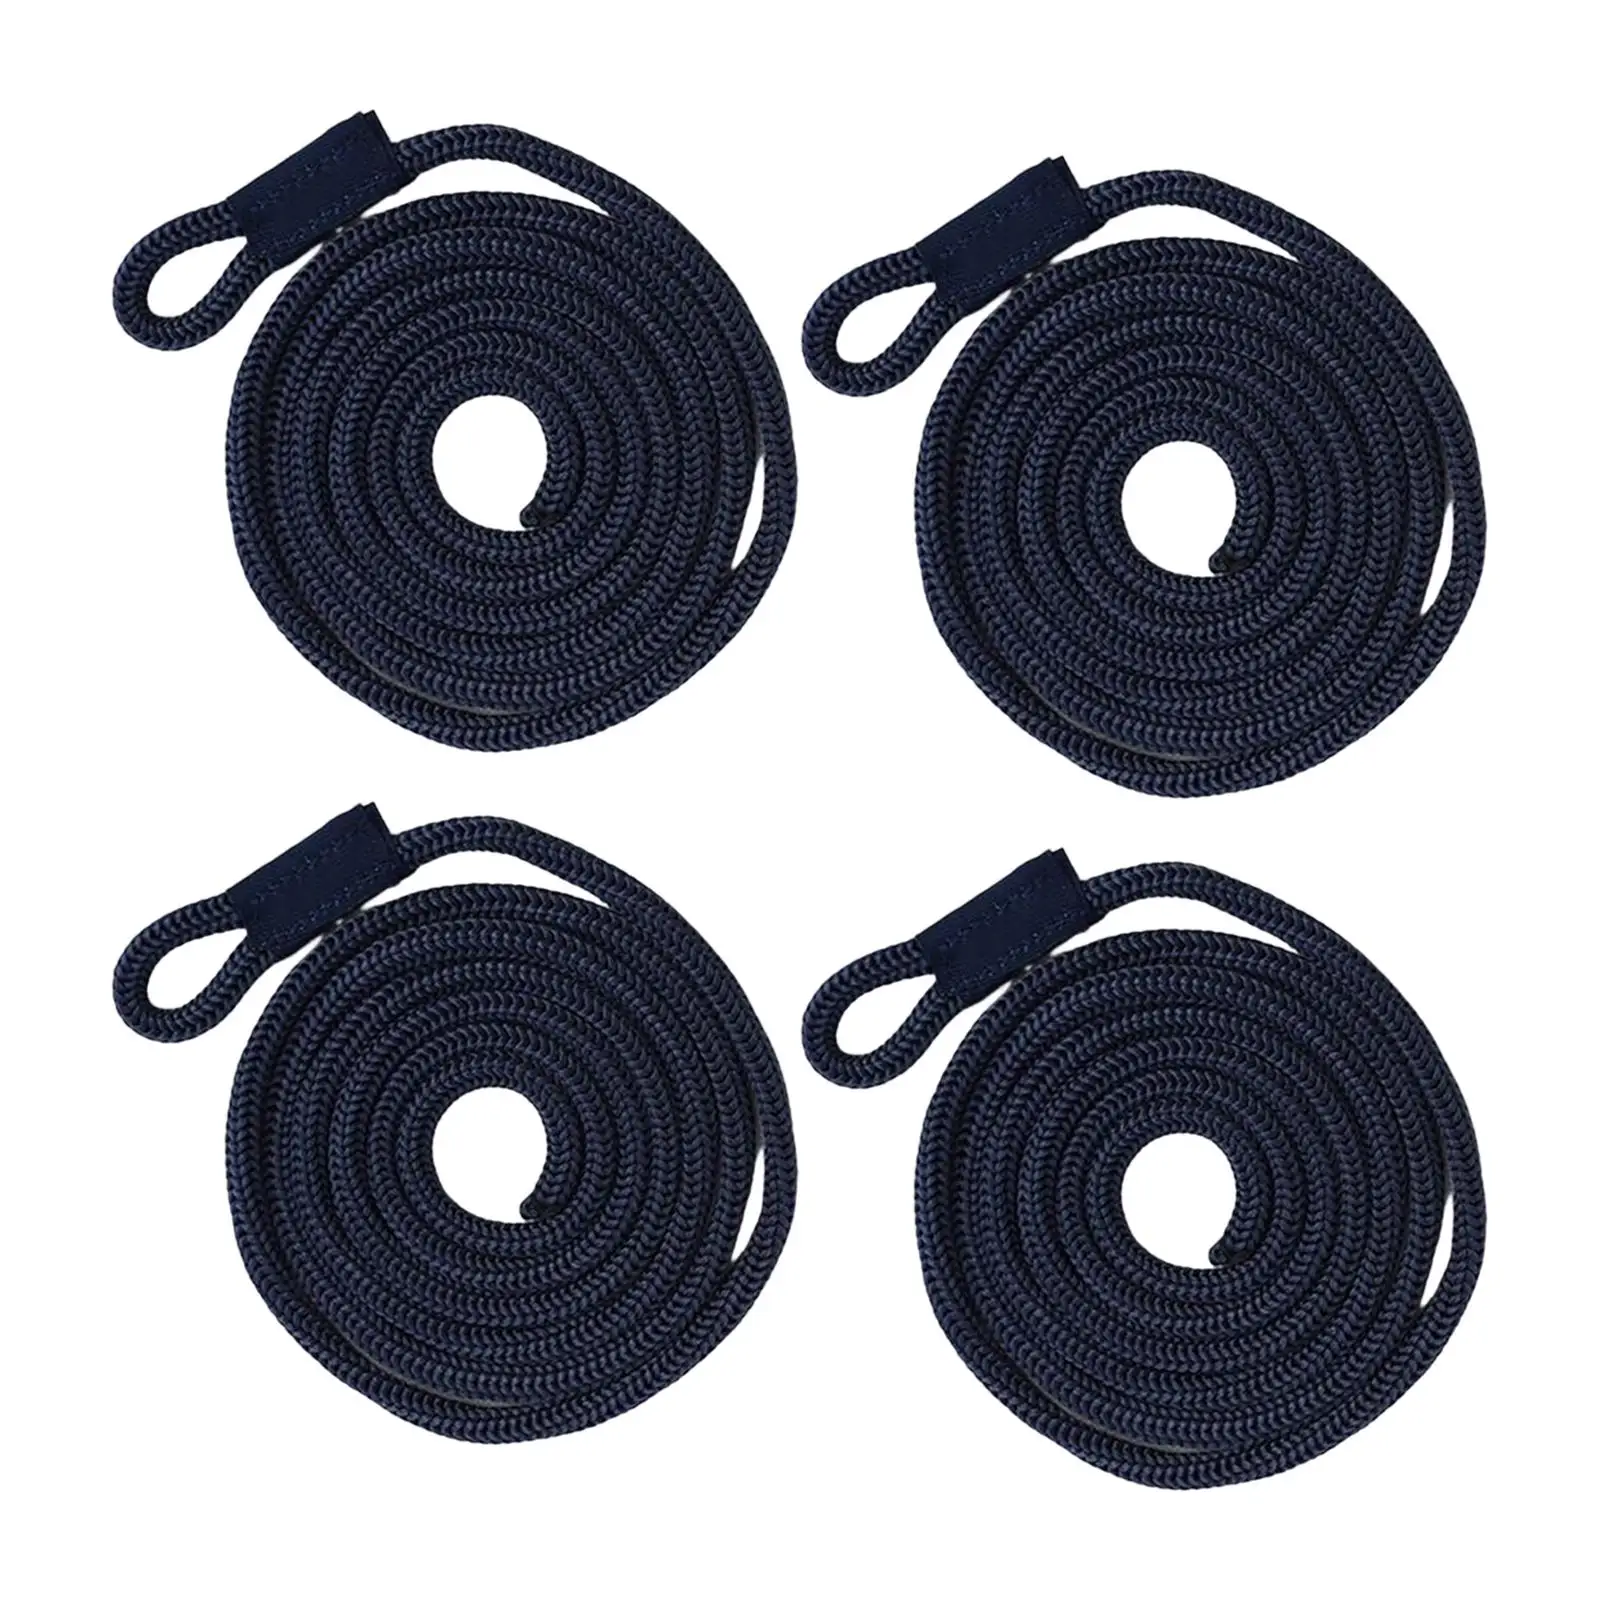 4Pcs Boat Lines, Boats Bumpers,Marine Bumpers for Pontoon Boat, Mooring Rope Bumpers Lines